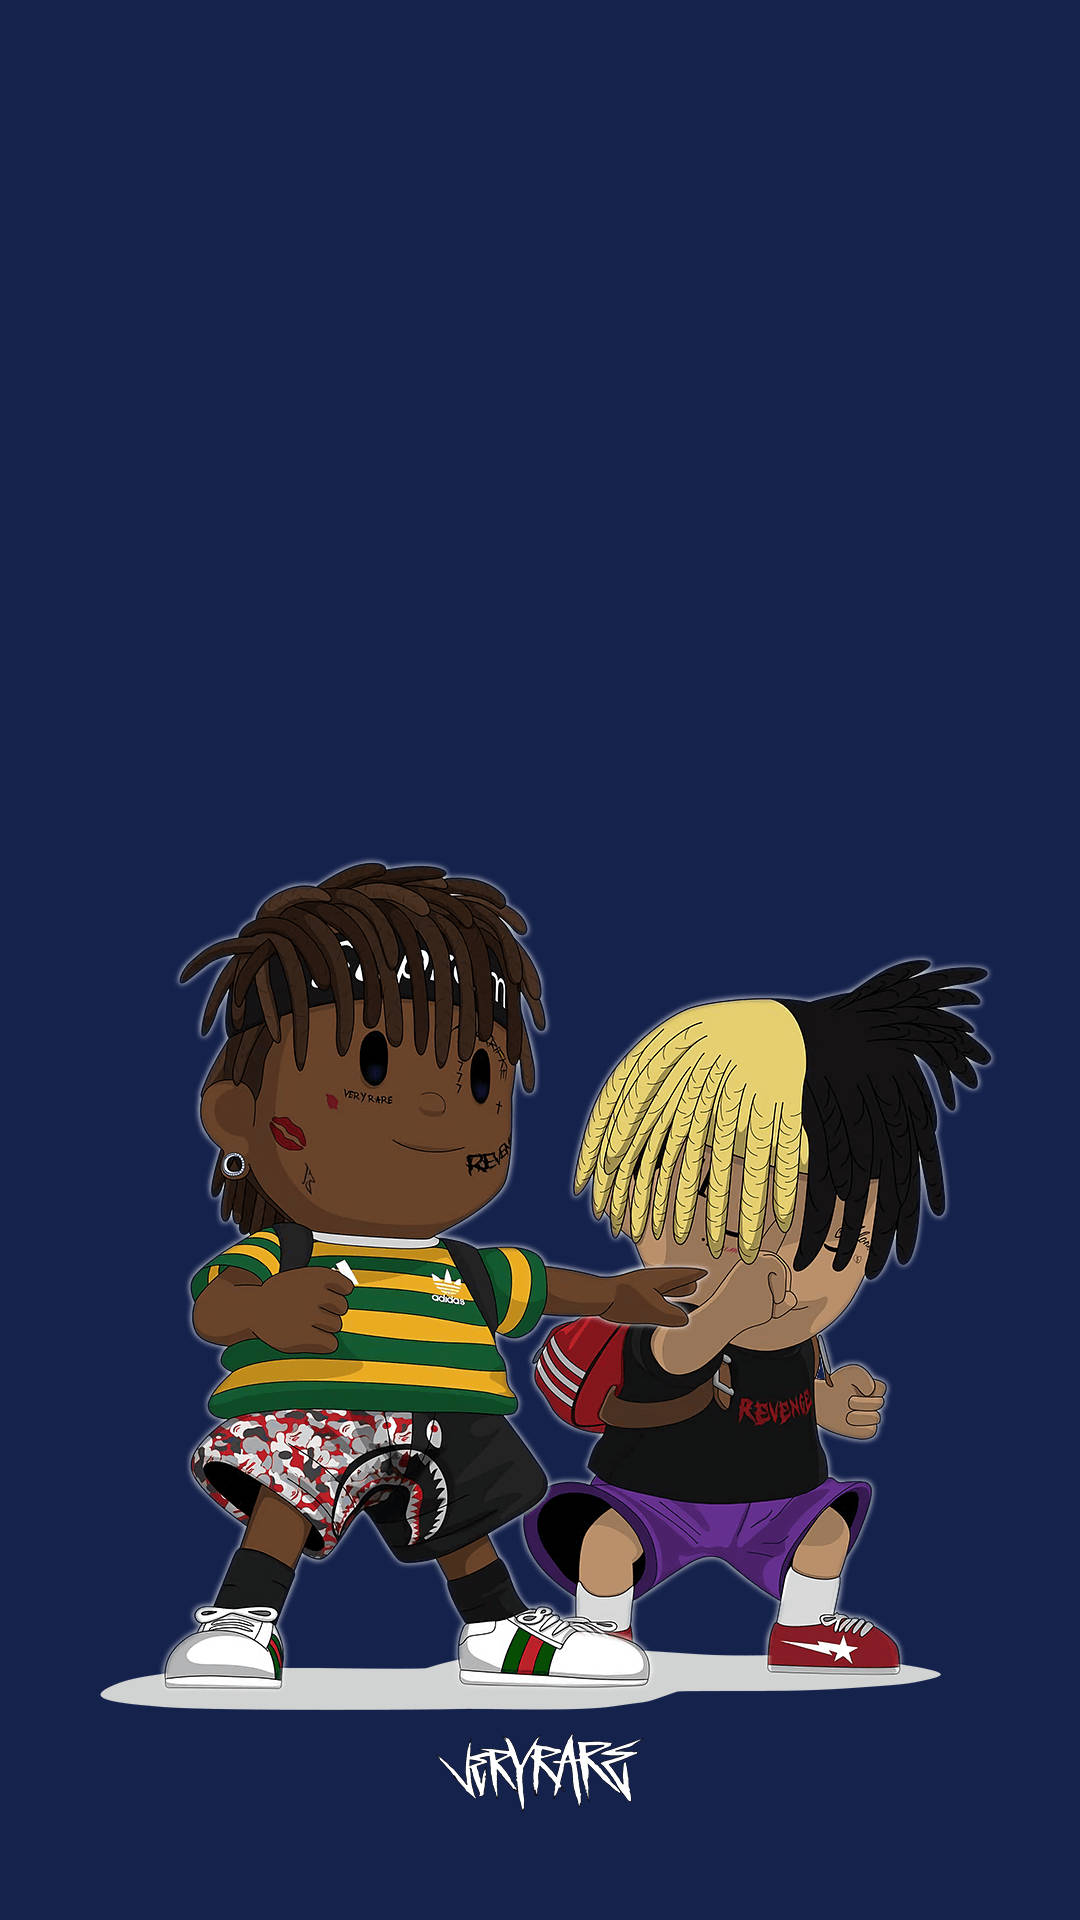 Free download Righteous anime screenshots for wallpapers JuiceWRLD  [2340x1080] for your Desktop, Mobile & Tablet | Explore 32+ Juice Wrld  Righteous Wallpapers | Juice Wallpaper, Orange Juice Wallpaper, Juice WRLD  Wallpapers